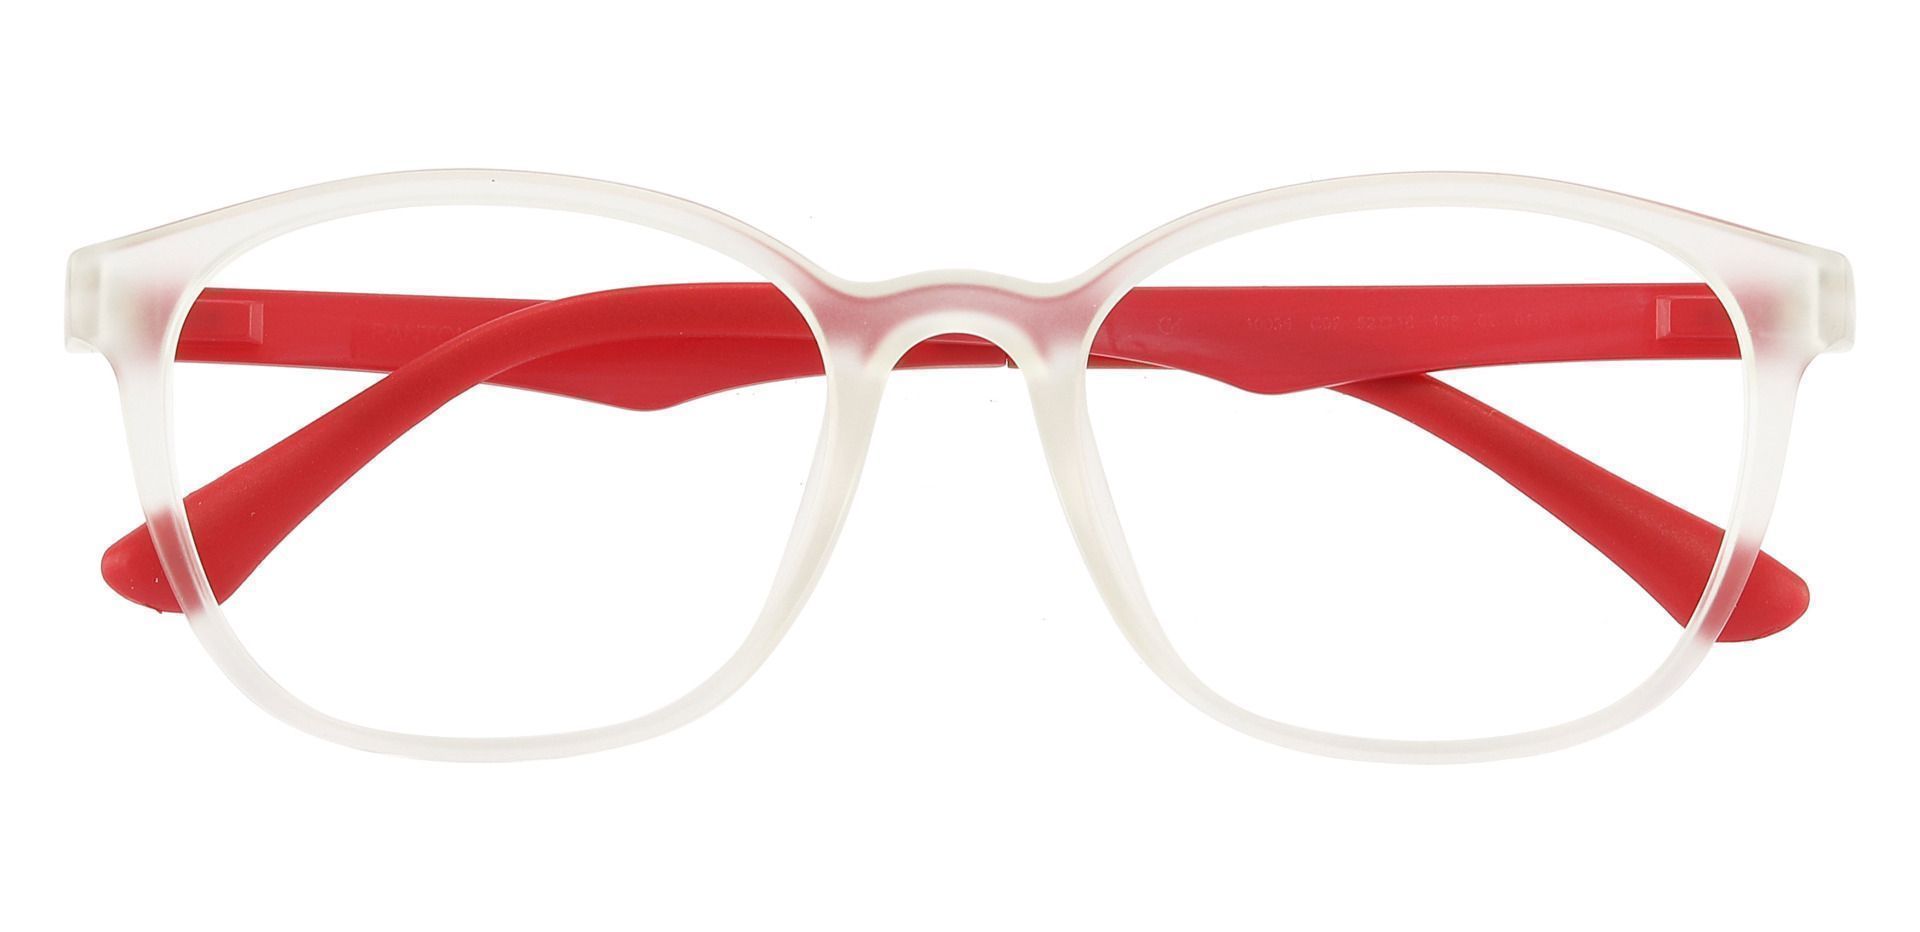 Ursula Oval Lined Bifocal Glasses - Clear